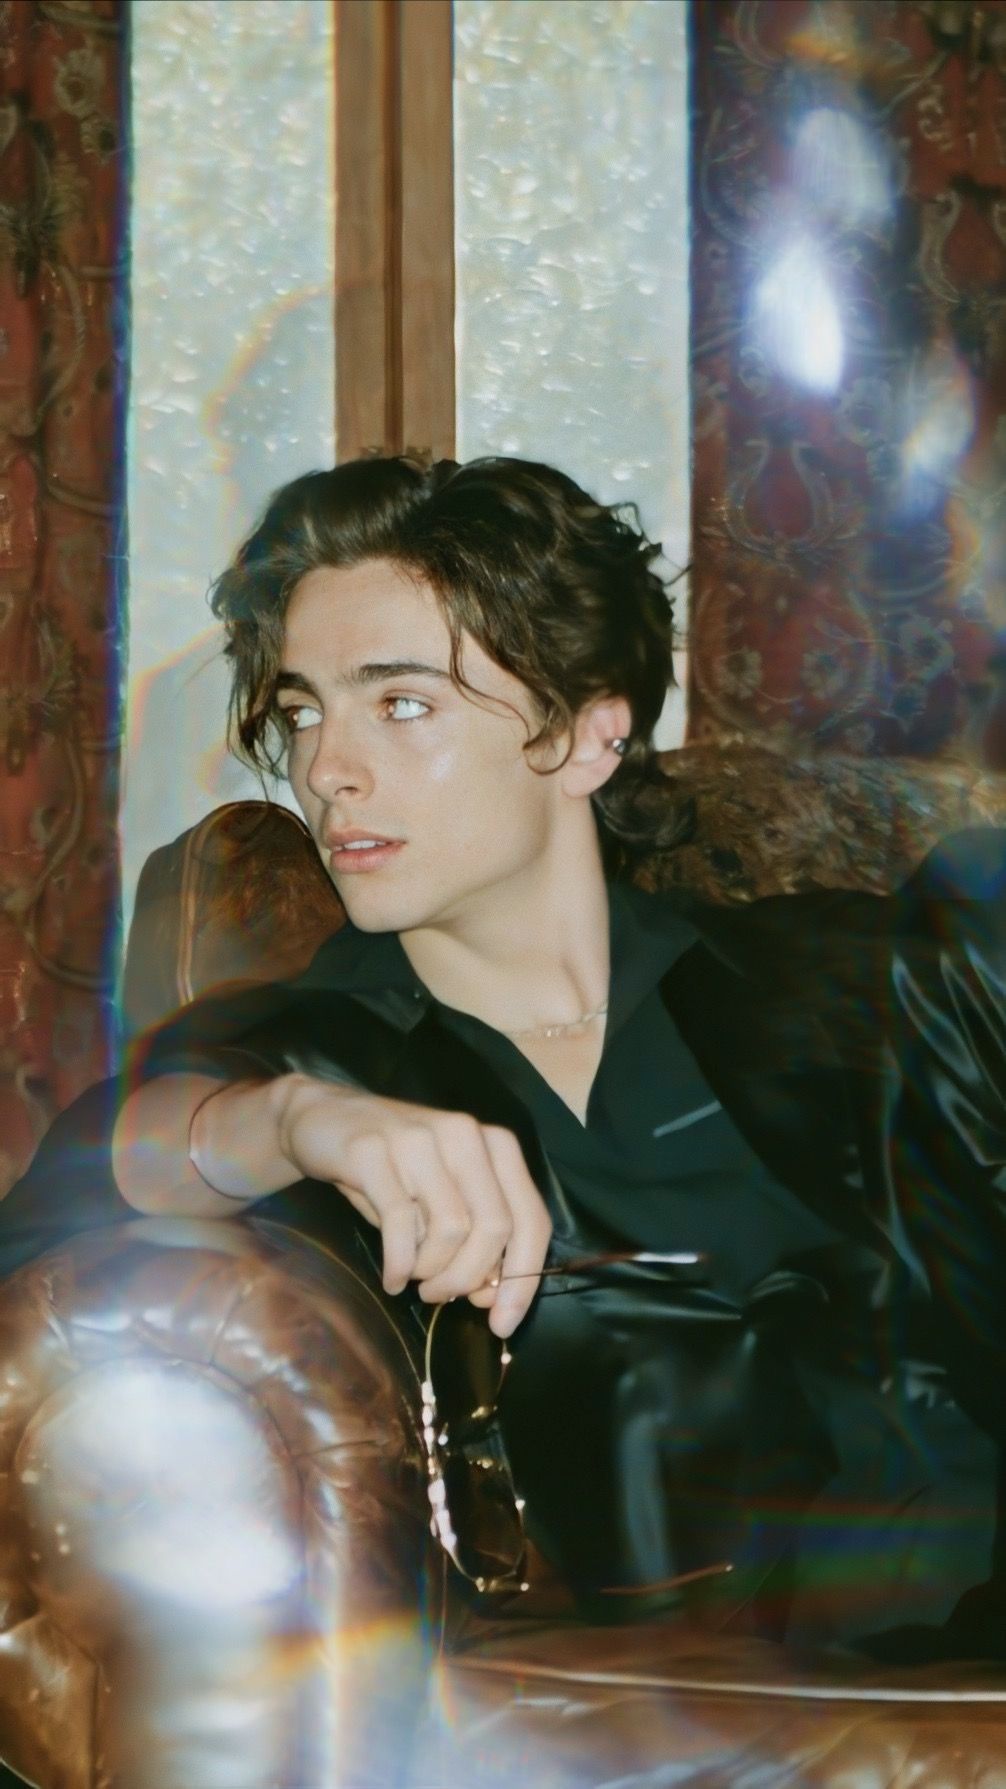 A man in black sitting on top of some leather - Timothee Chalamet